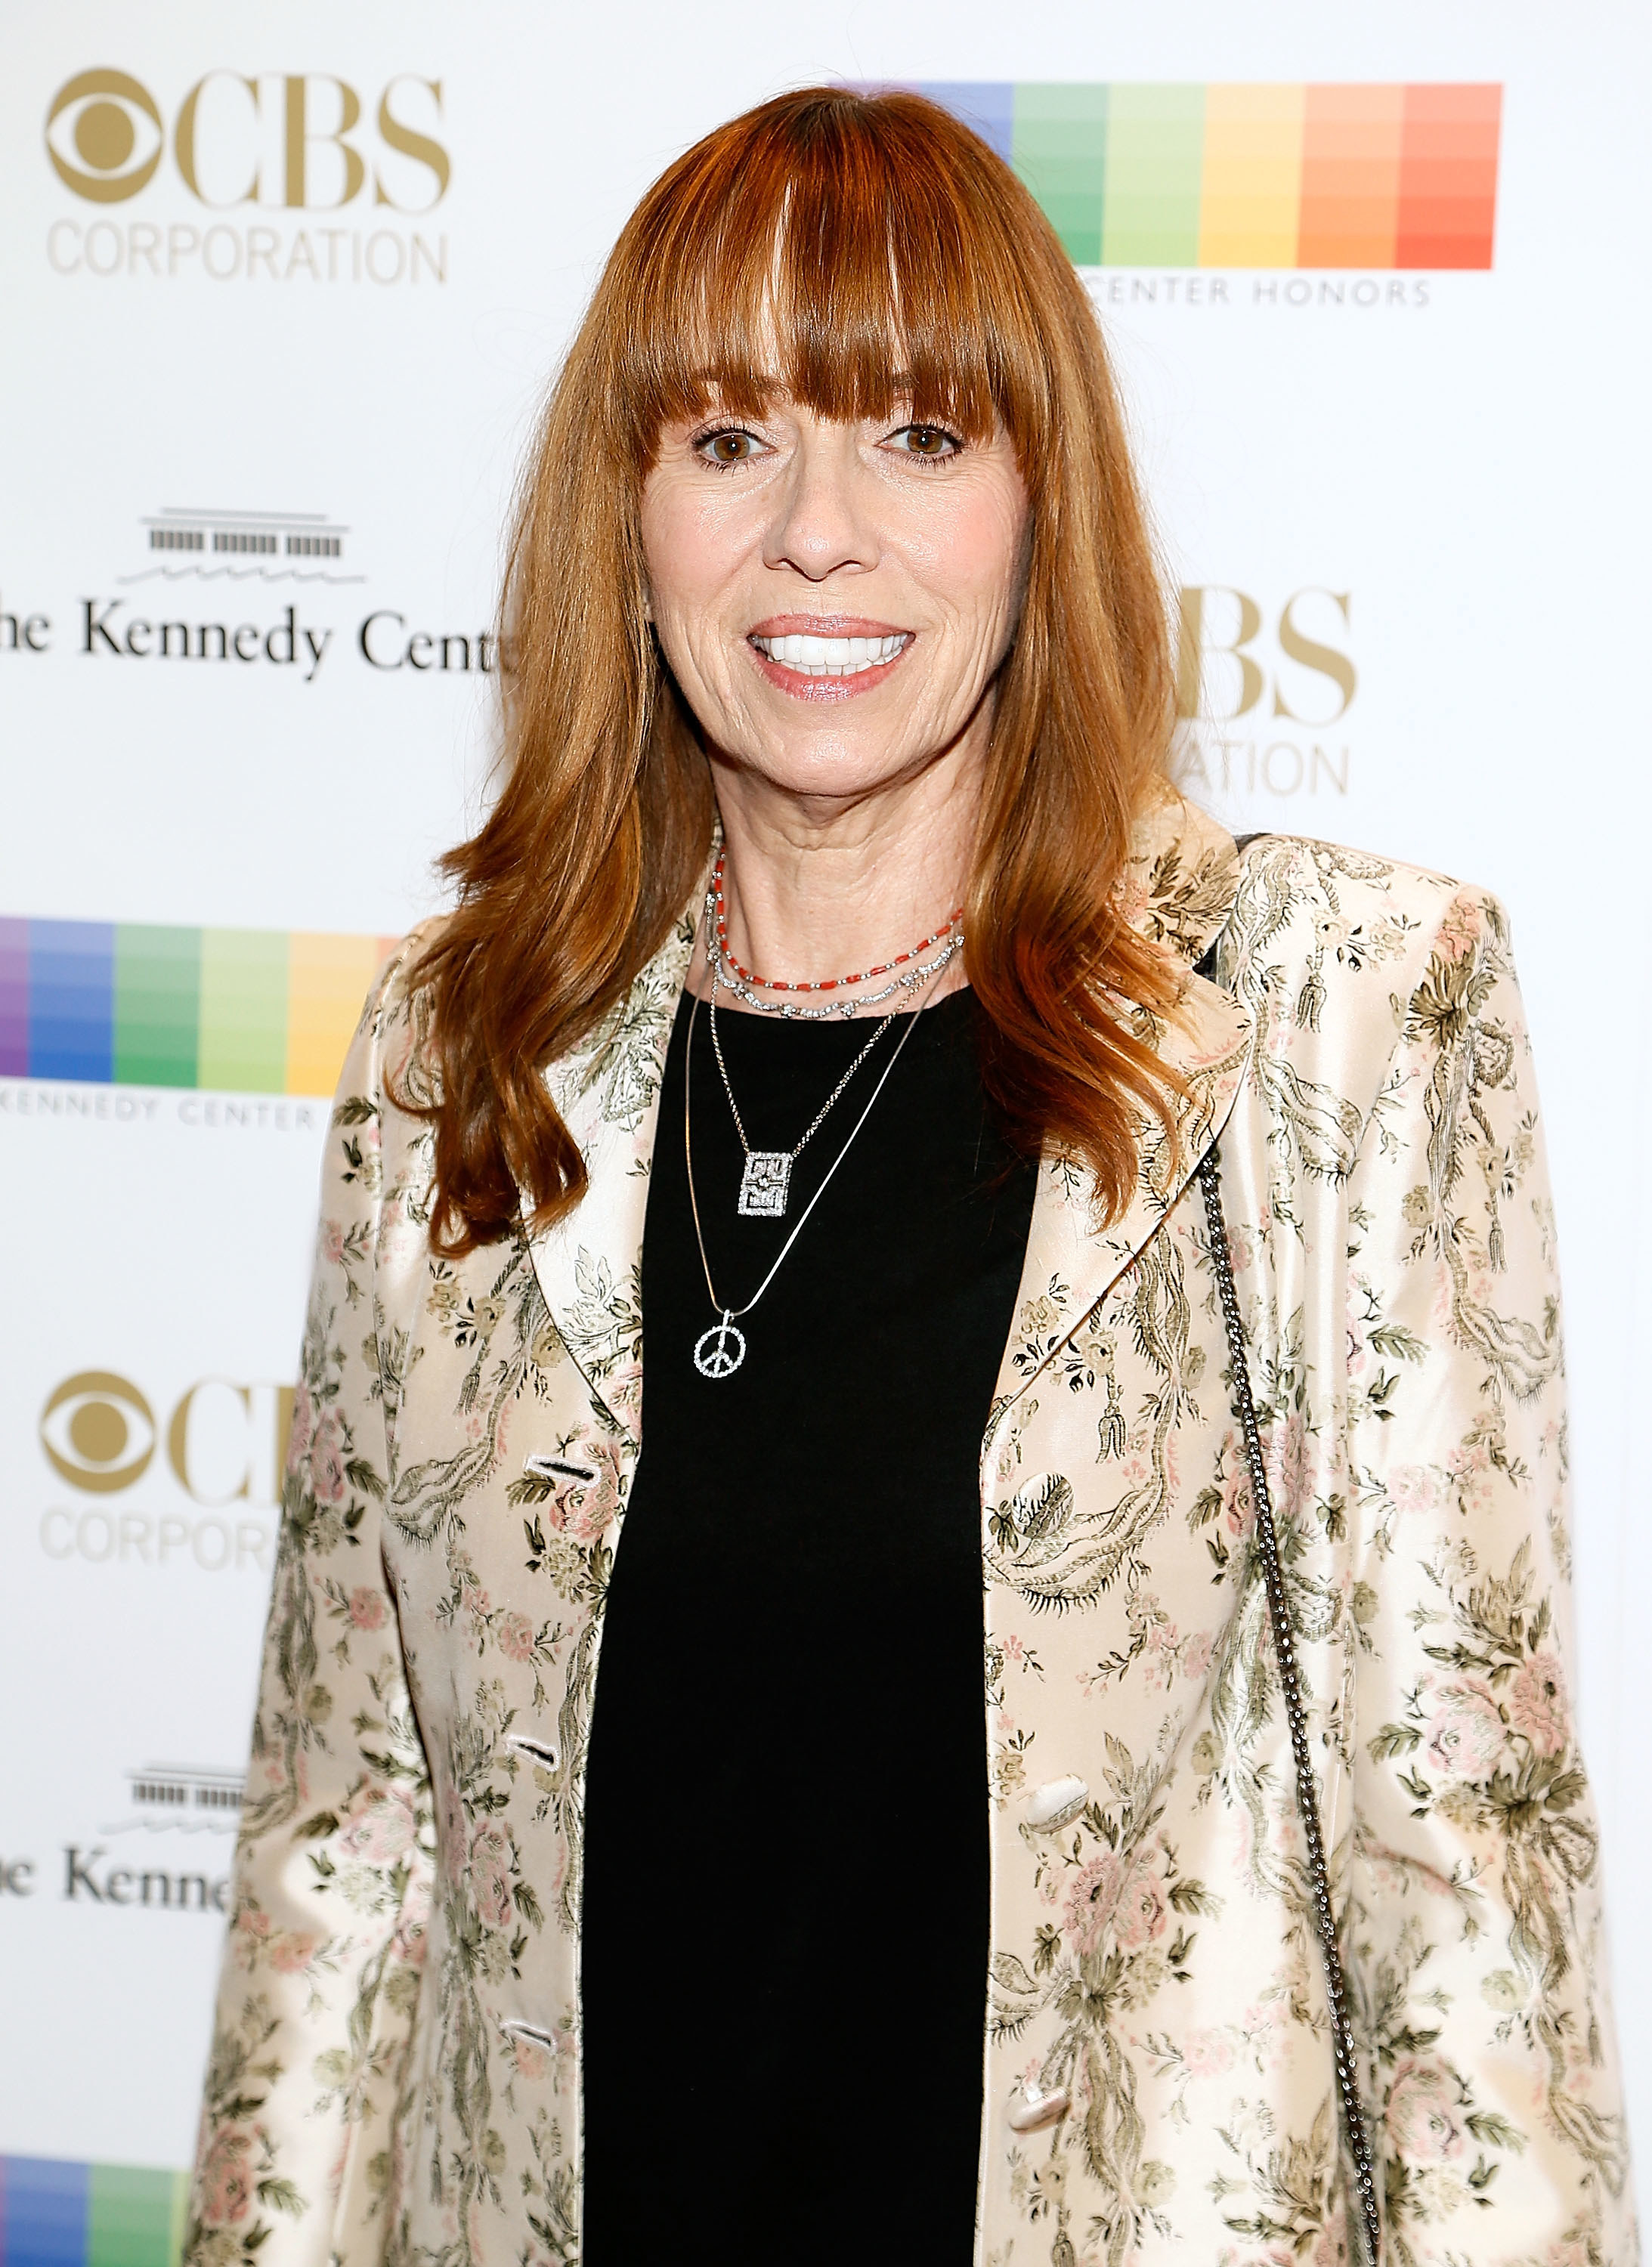 Mackenzie Phillips smiles at an event